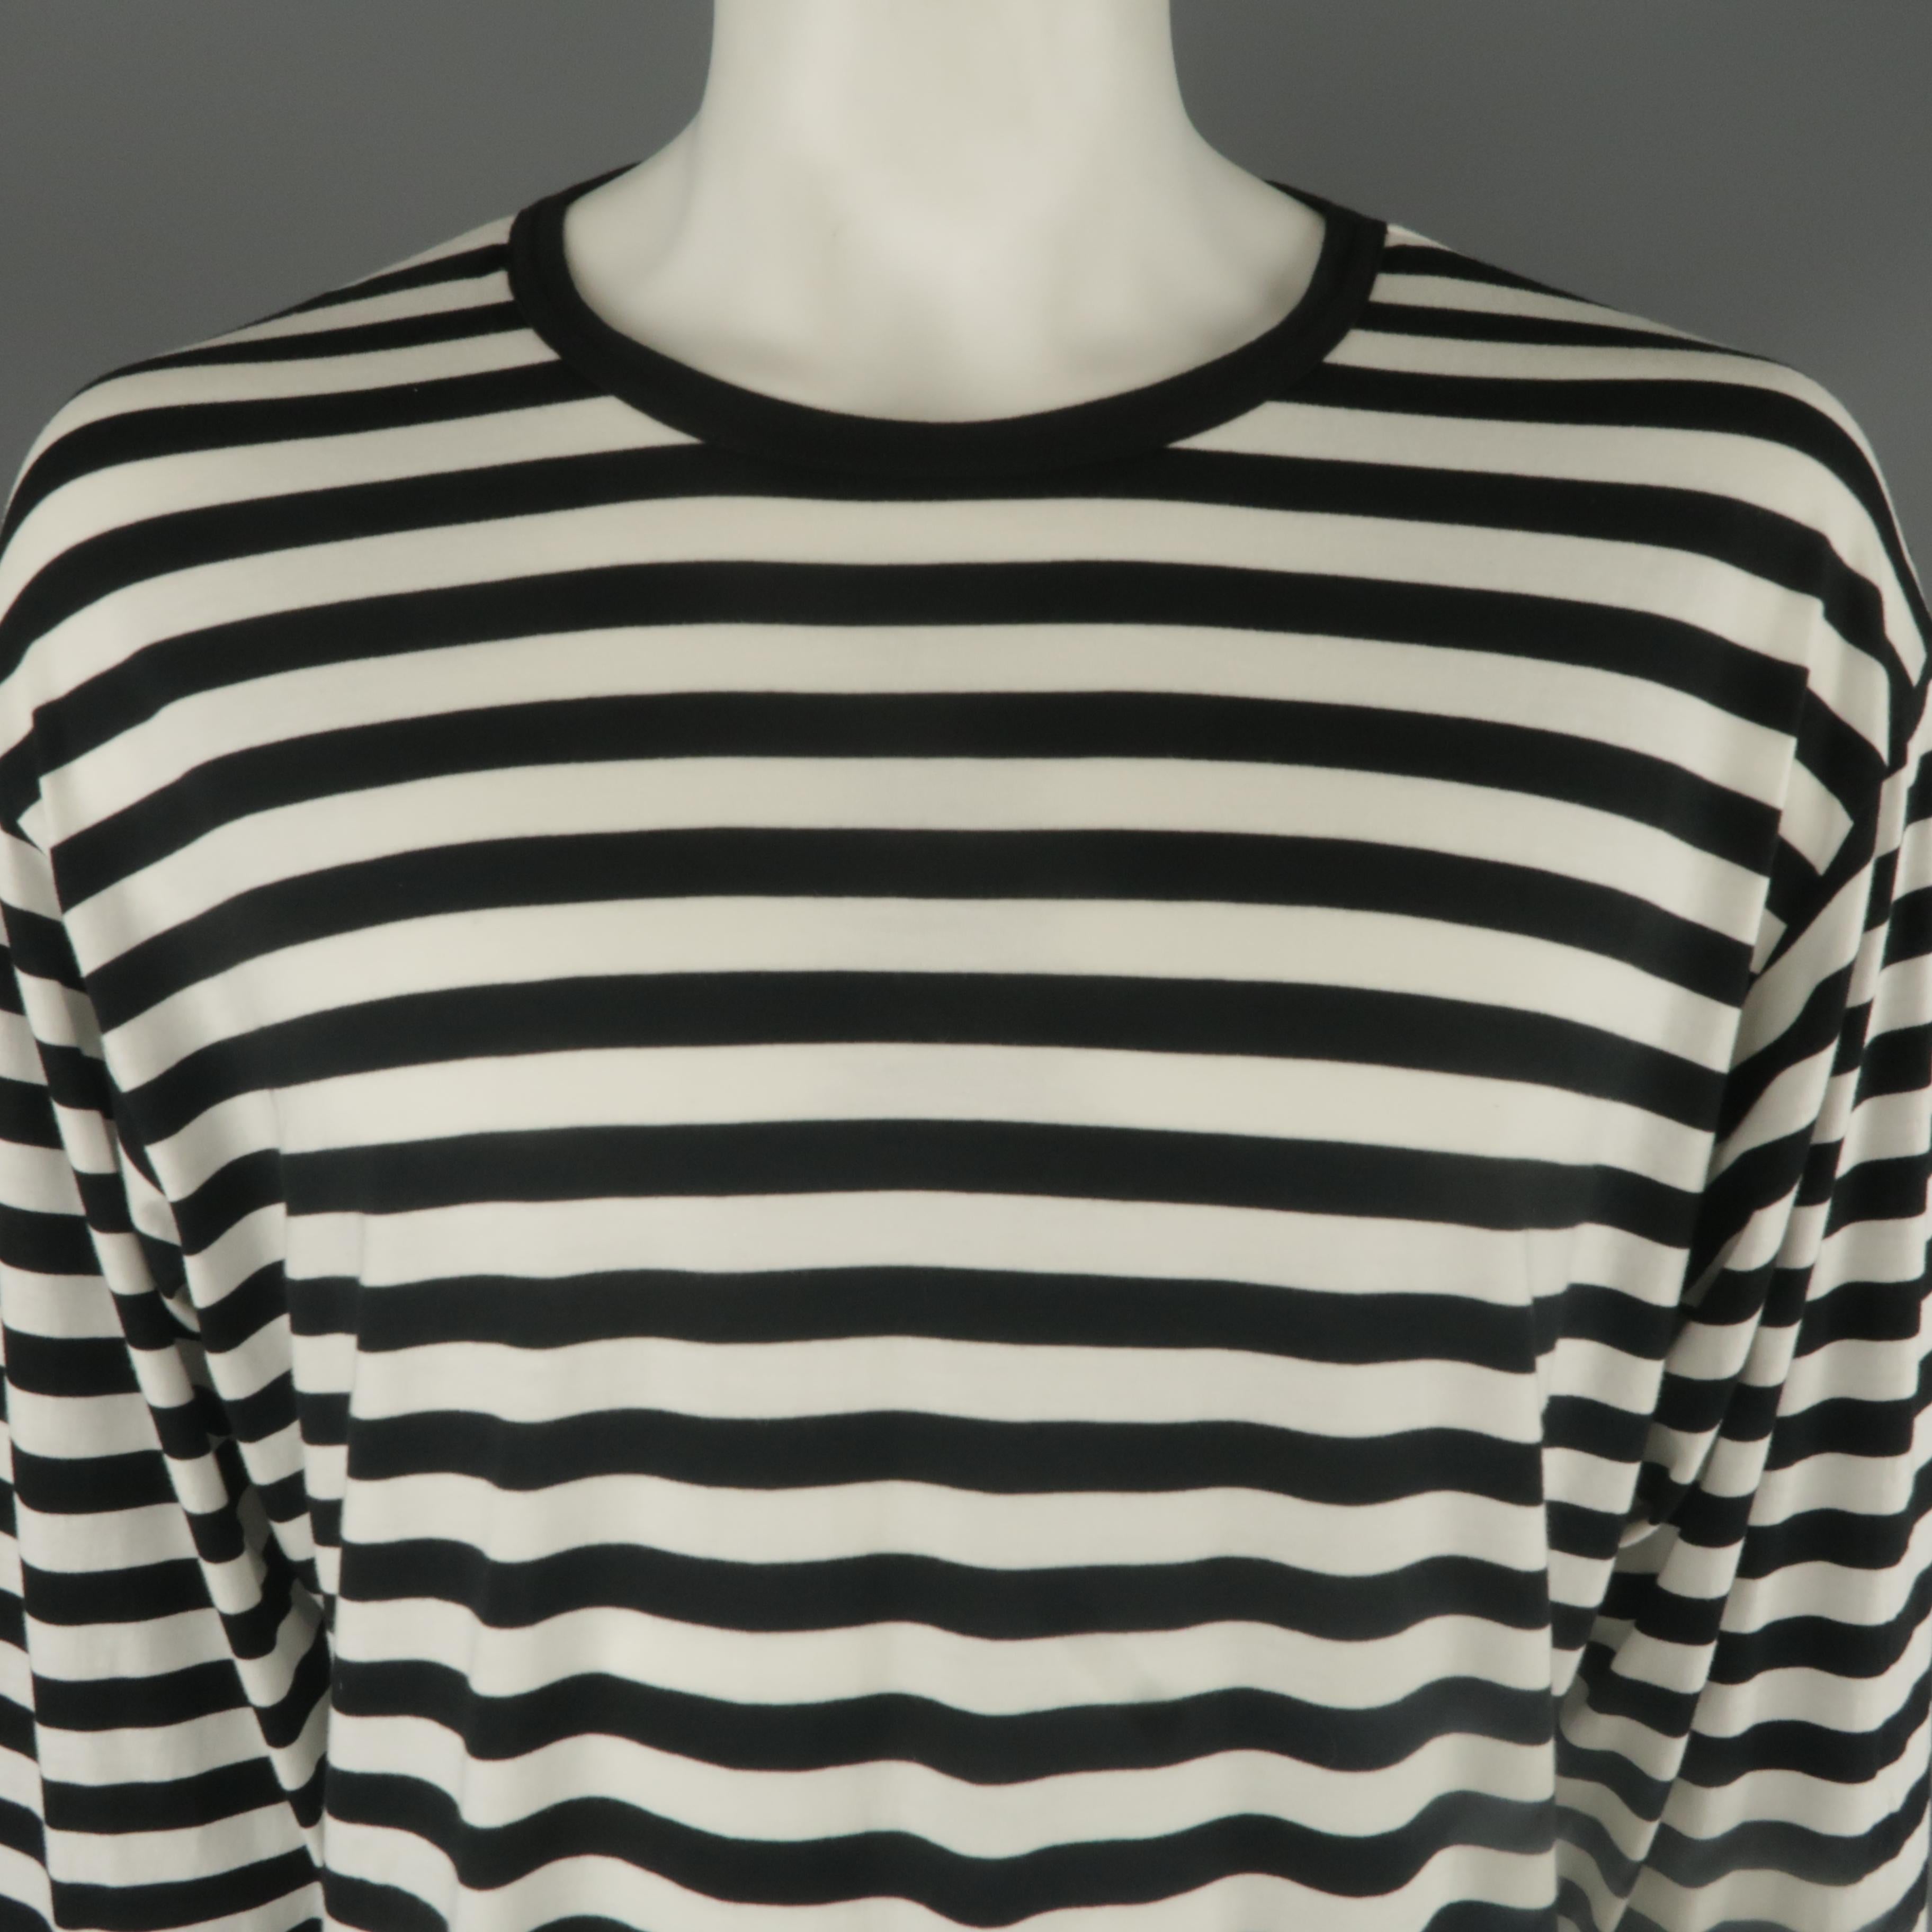 YOHJI YAMAMOTO T-shirt comes in black and white striped cotton viscose jersey with a crewneck and logo 